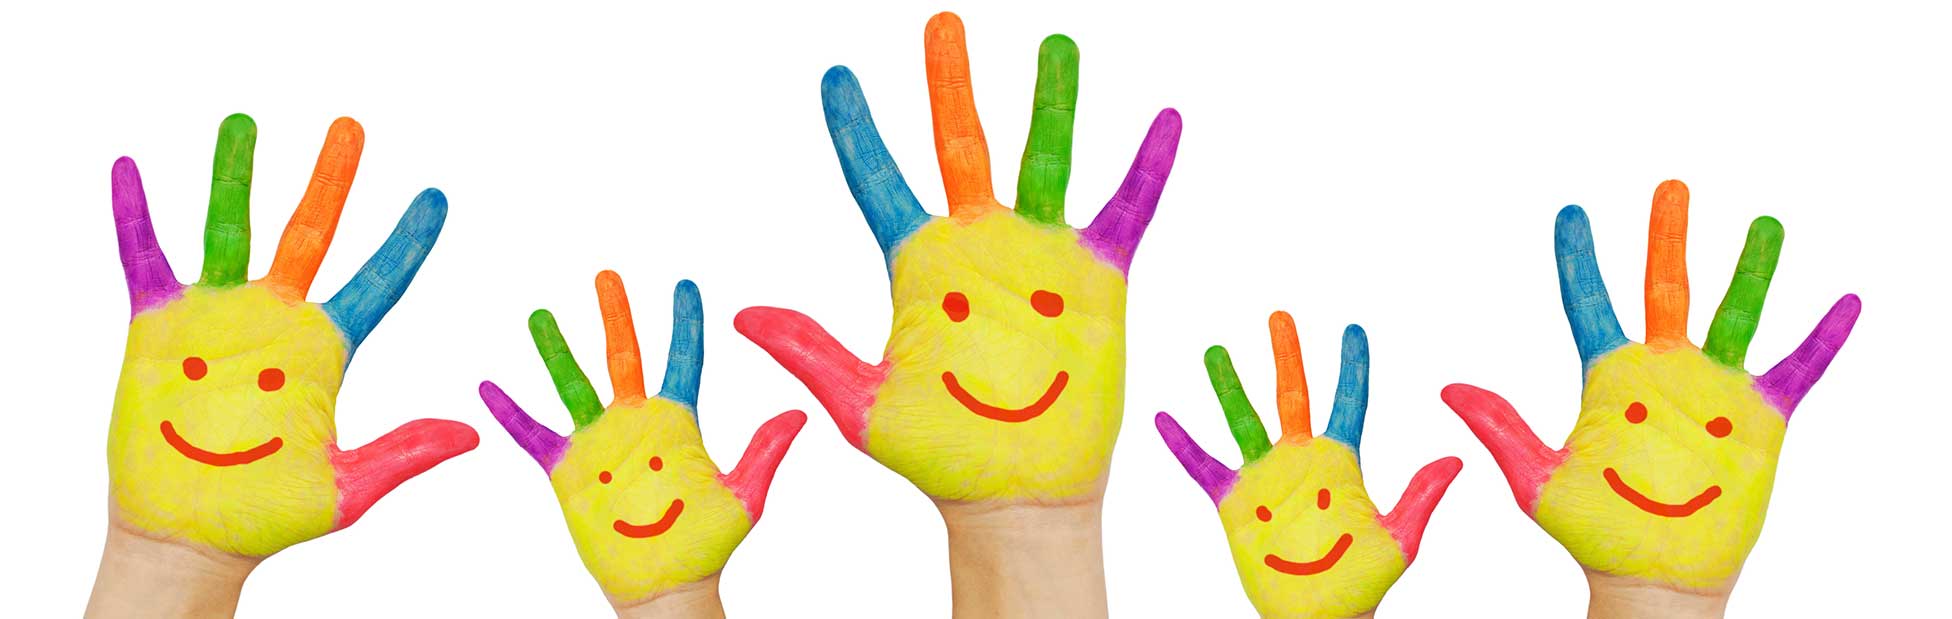 Painted hands with smiley faces waving